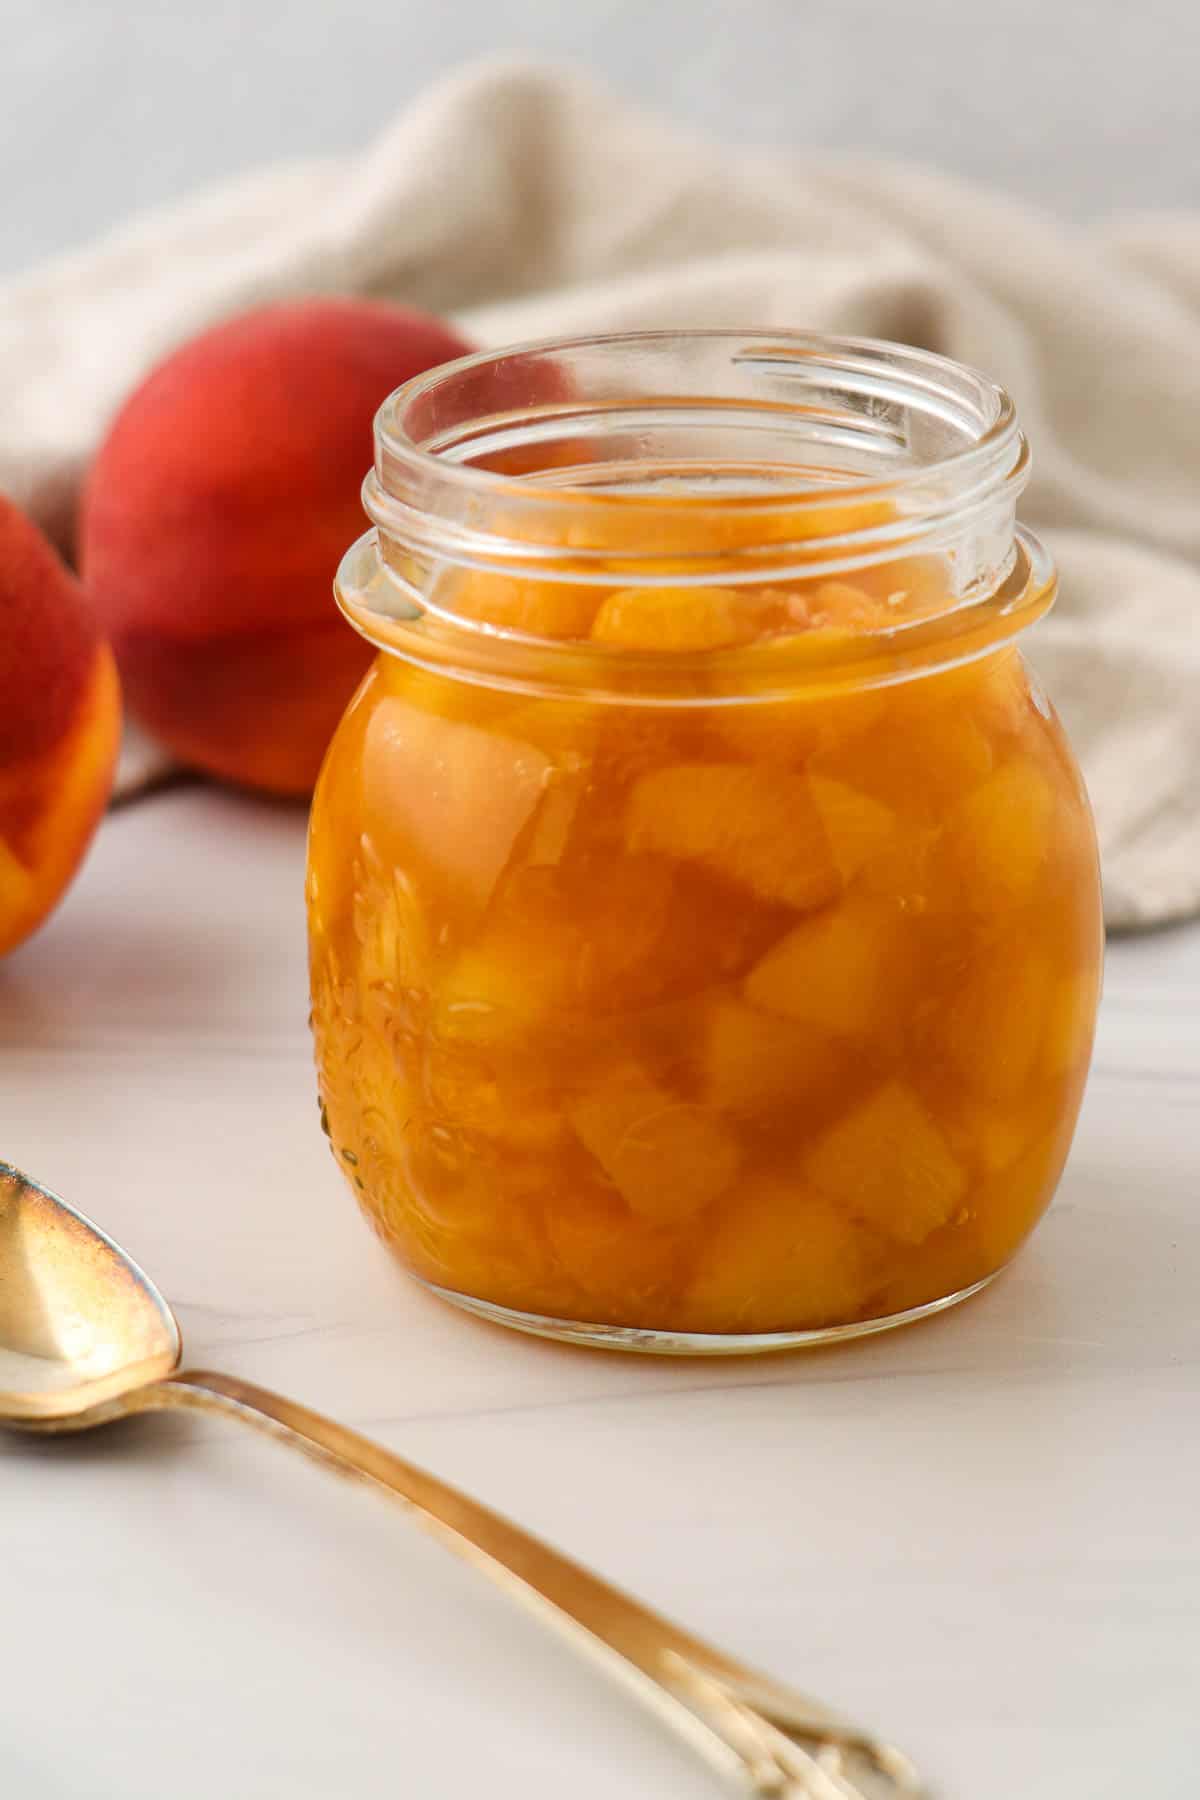 Peach compote in a jar next to a spoon and fresh peaches.